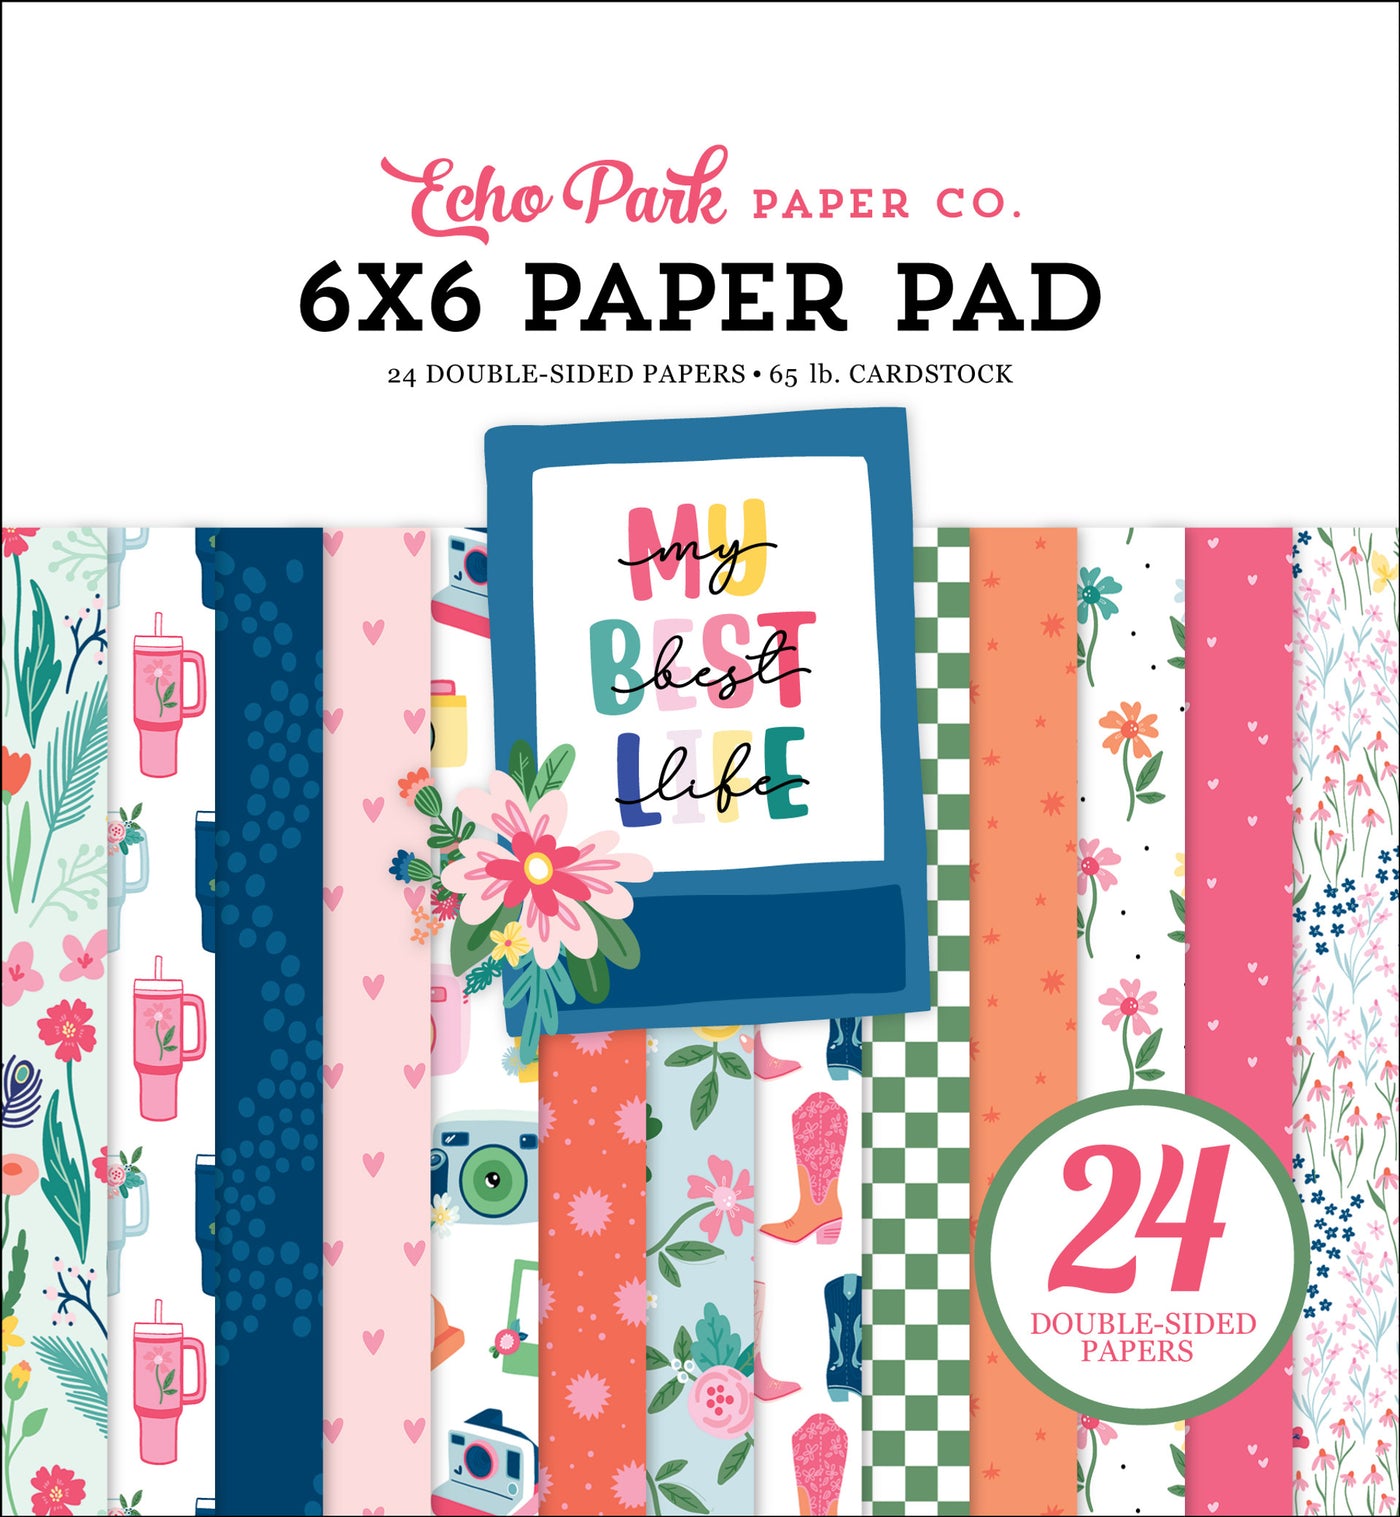 6x6 MY BEST LIFE pad with 24 double-sided sheets, great for springtime card making and other happy craft projects. From Echo Park Paper Co.